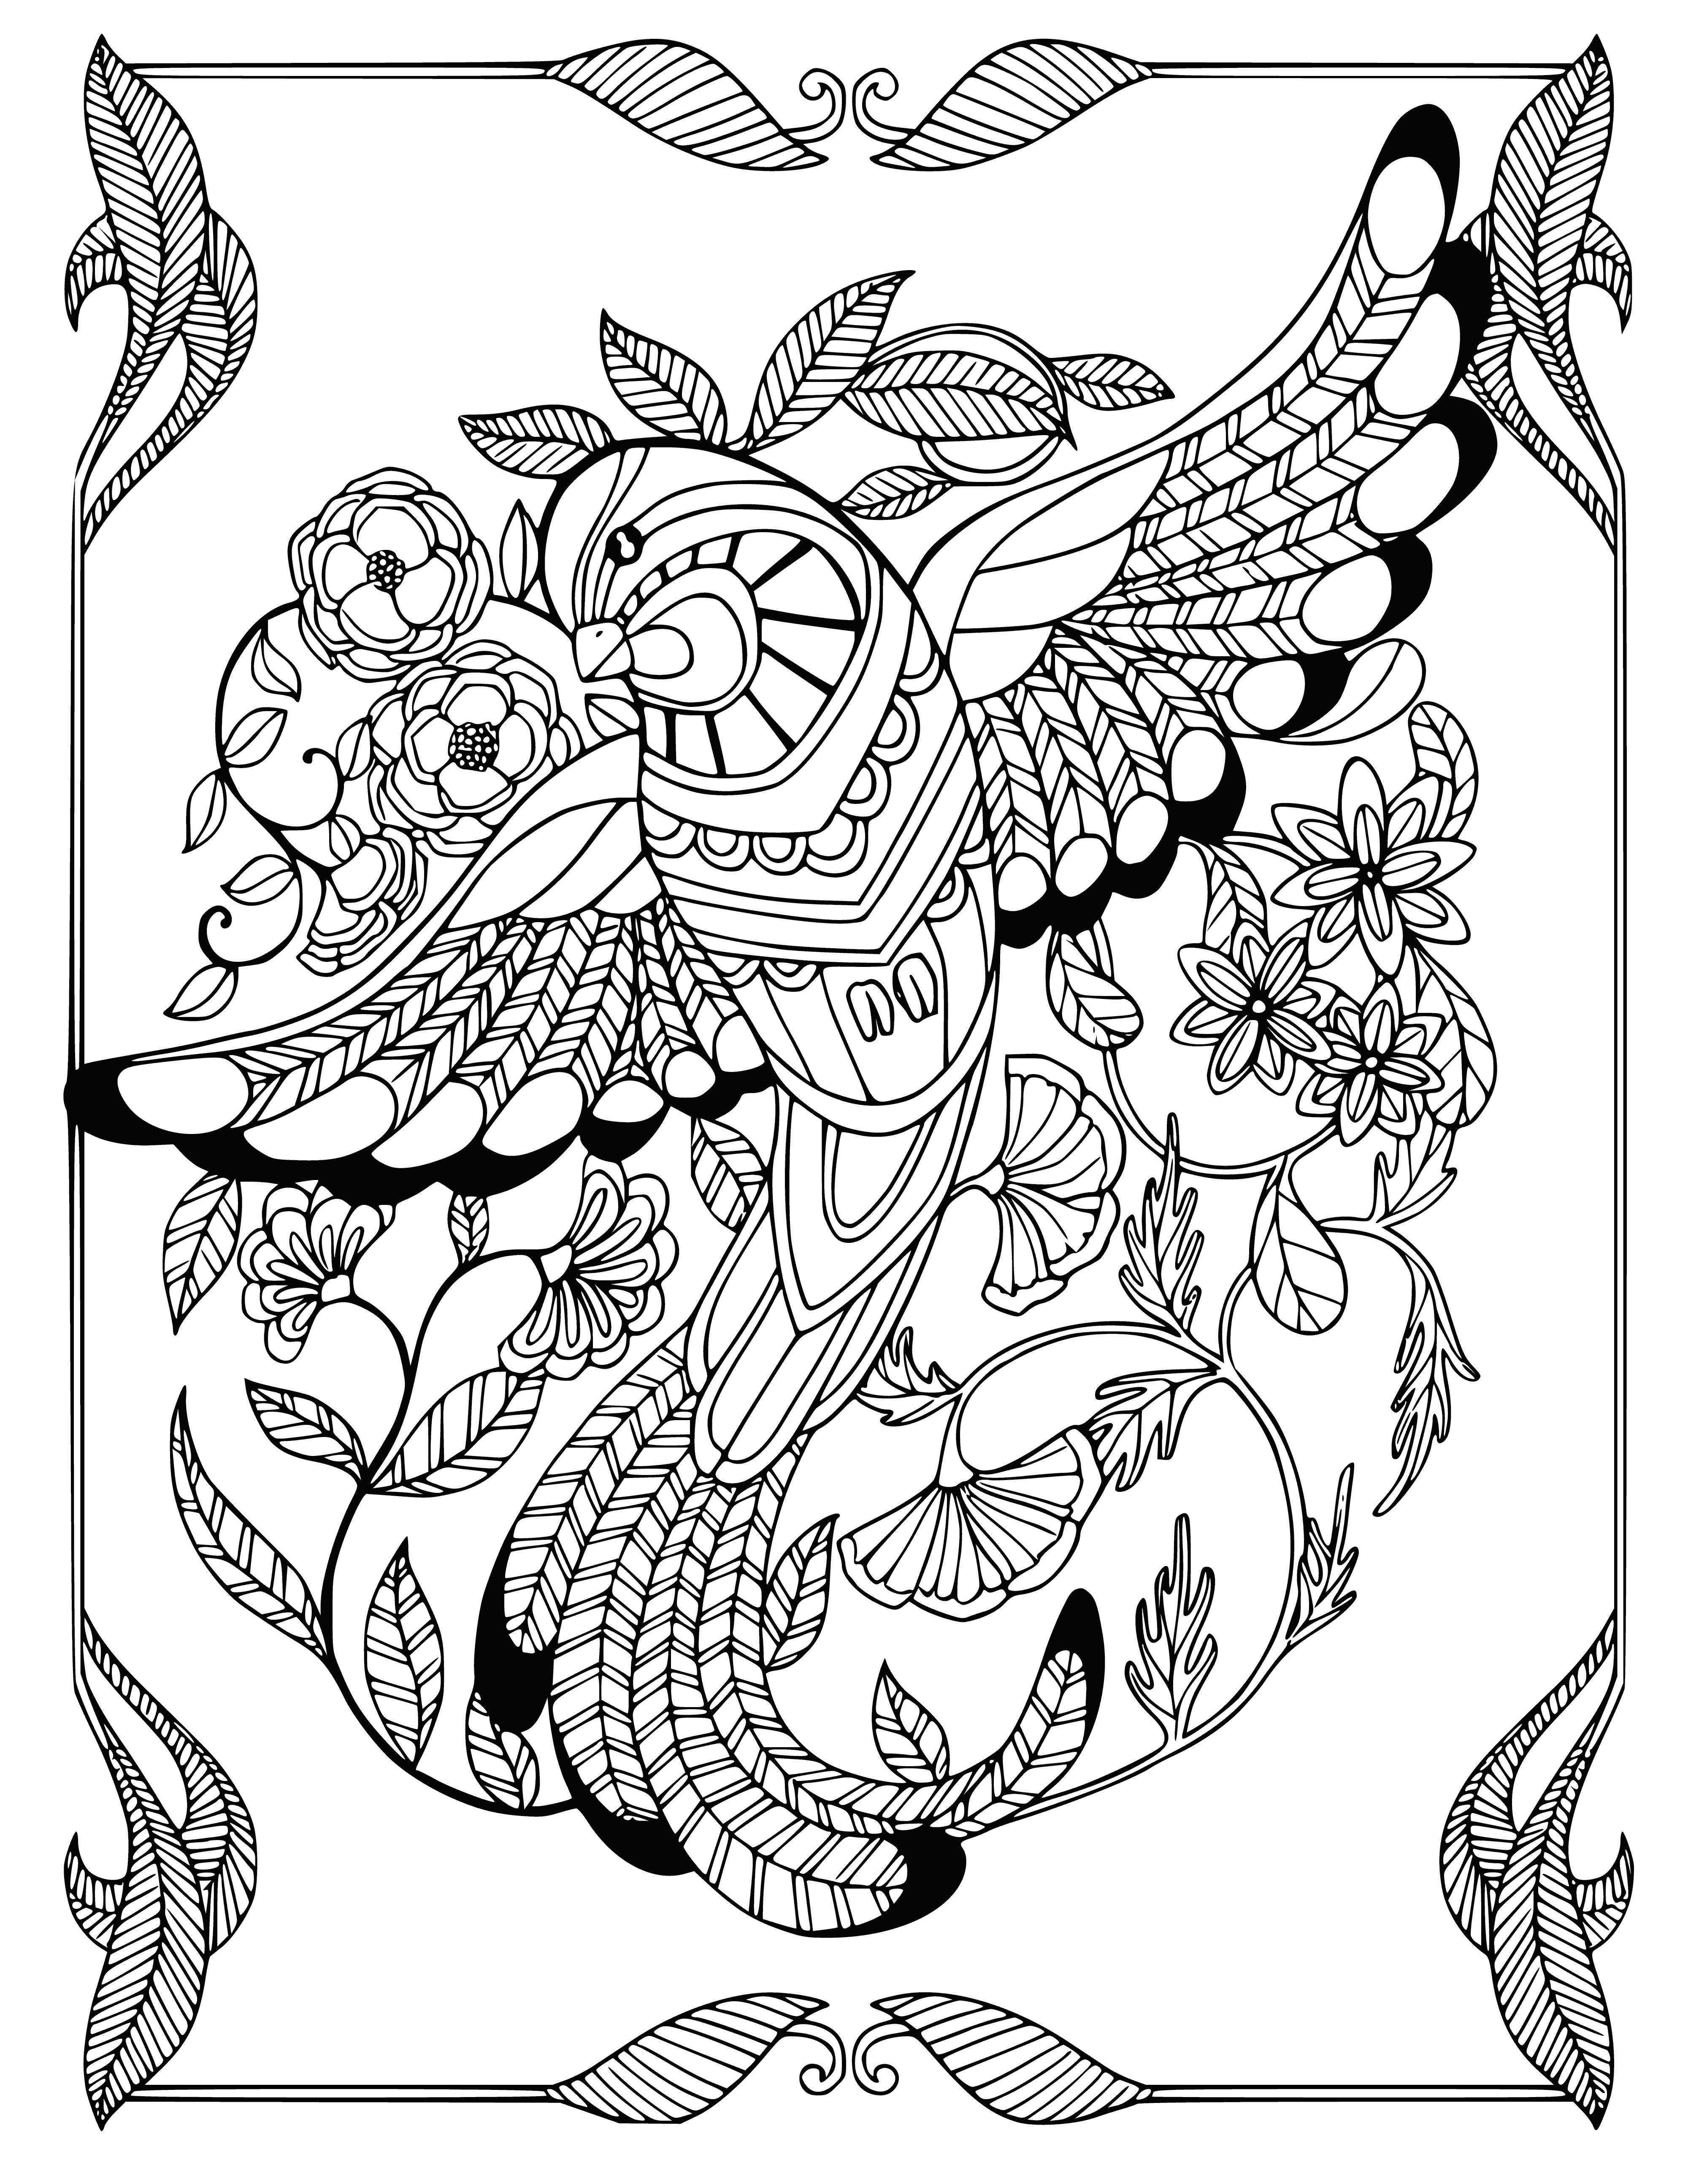 coloring page: Adorable small bird perched on branch. Blue body, white belly, yellow wings, long thin beak and black eyes.